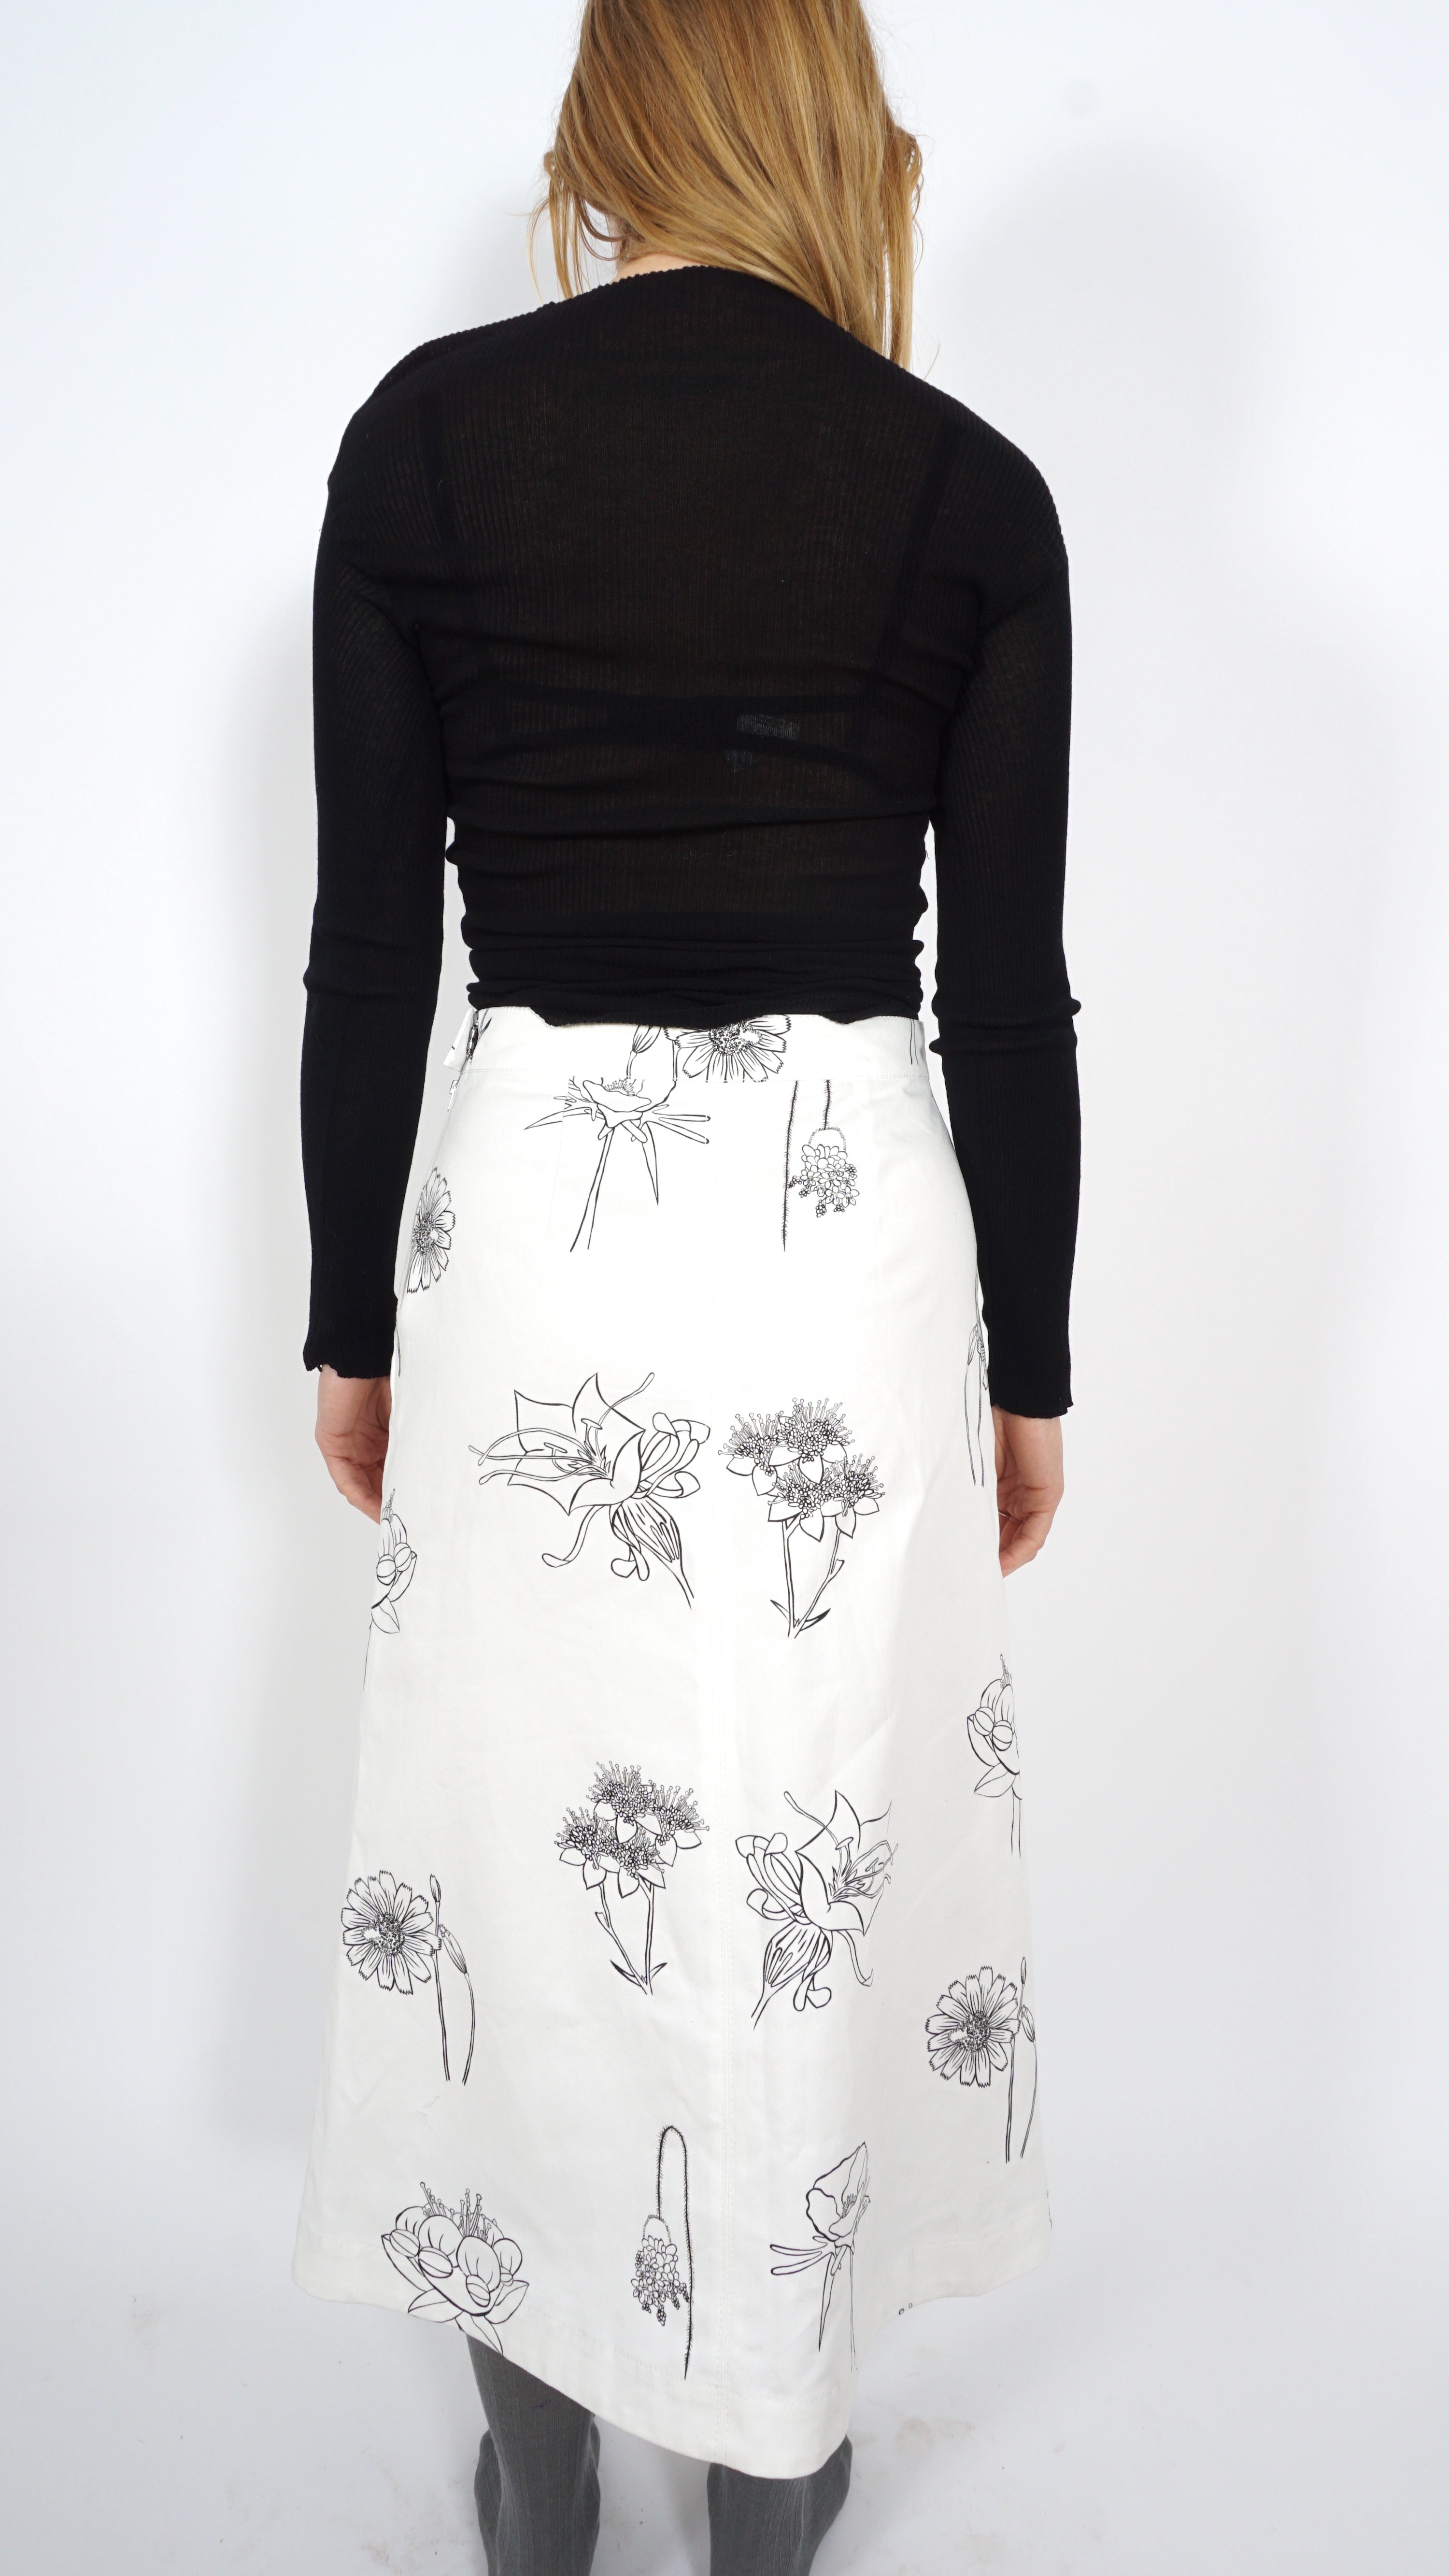 Flower skirt by Maria Holm